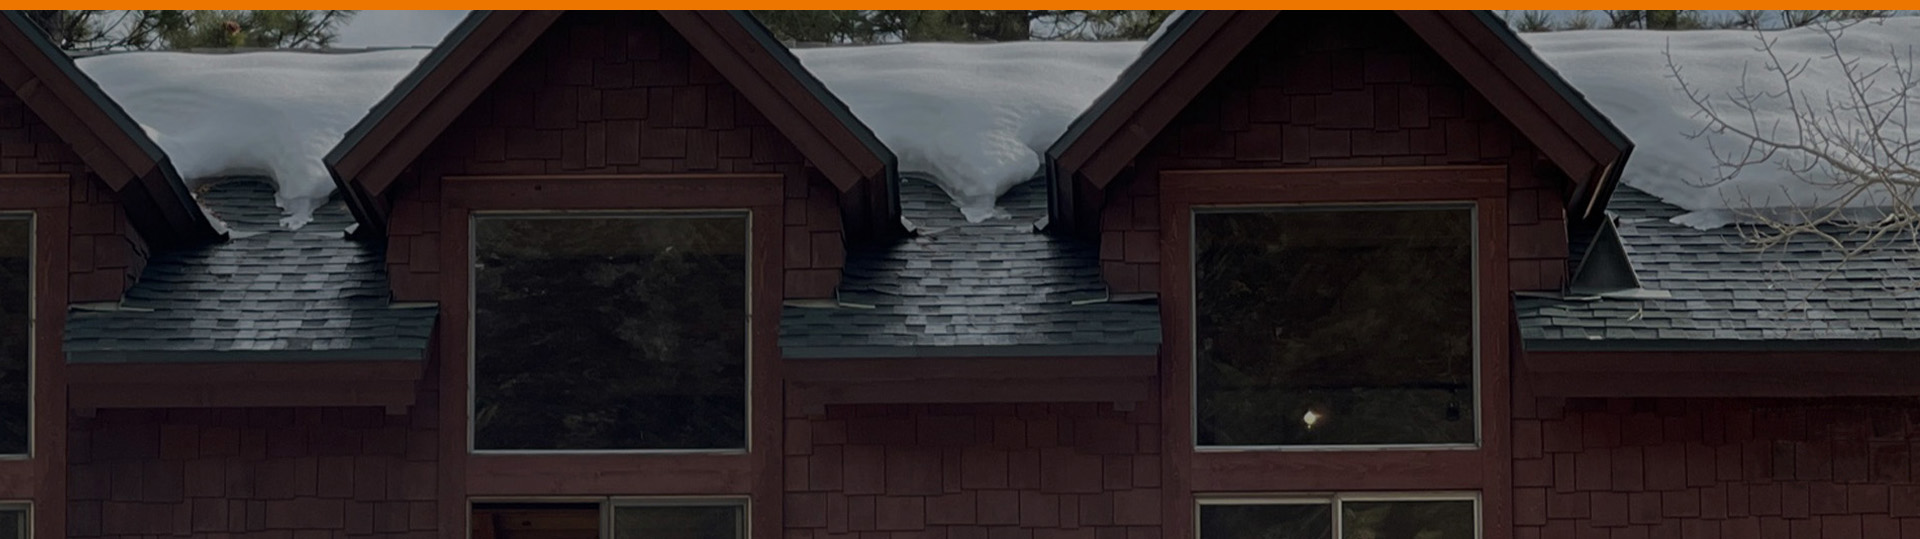 Best roof heating banner for the best roof de-icing systems